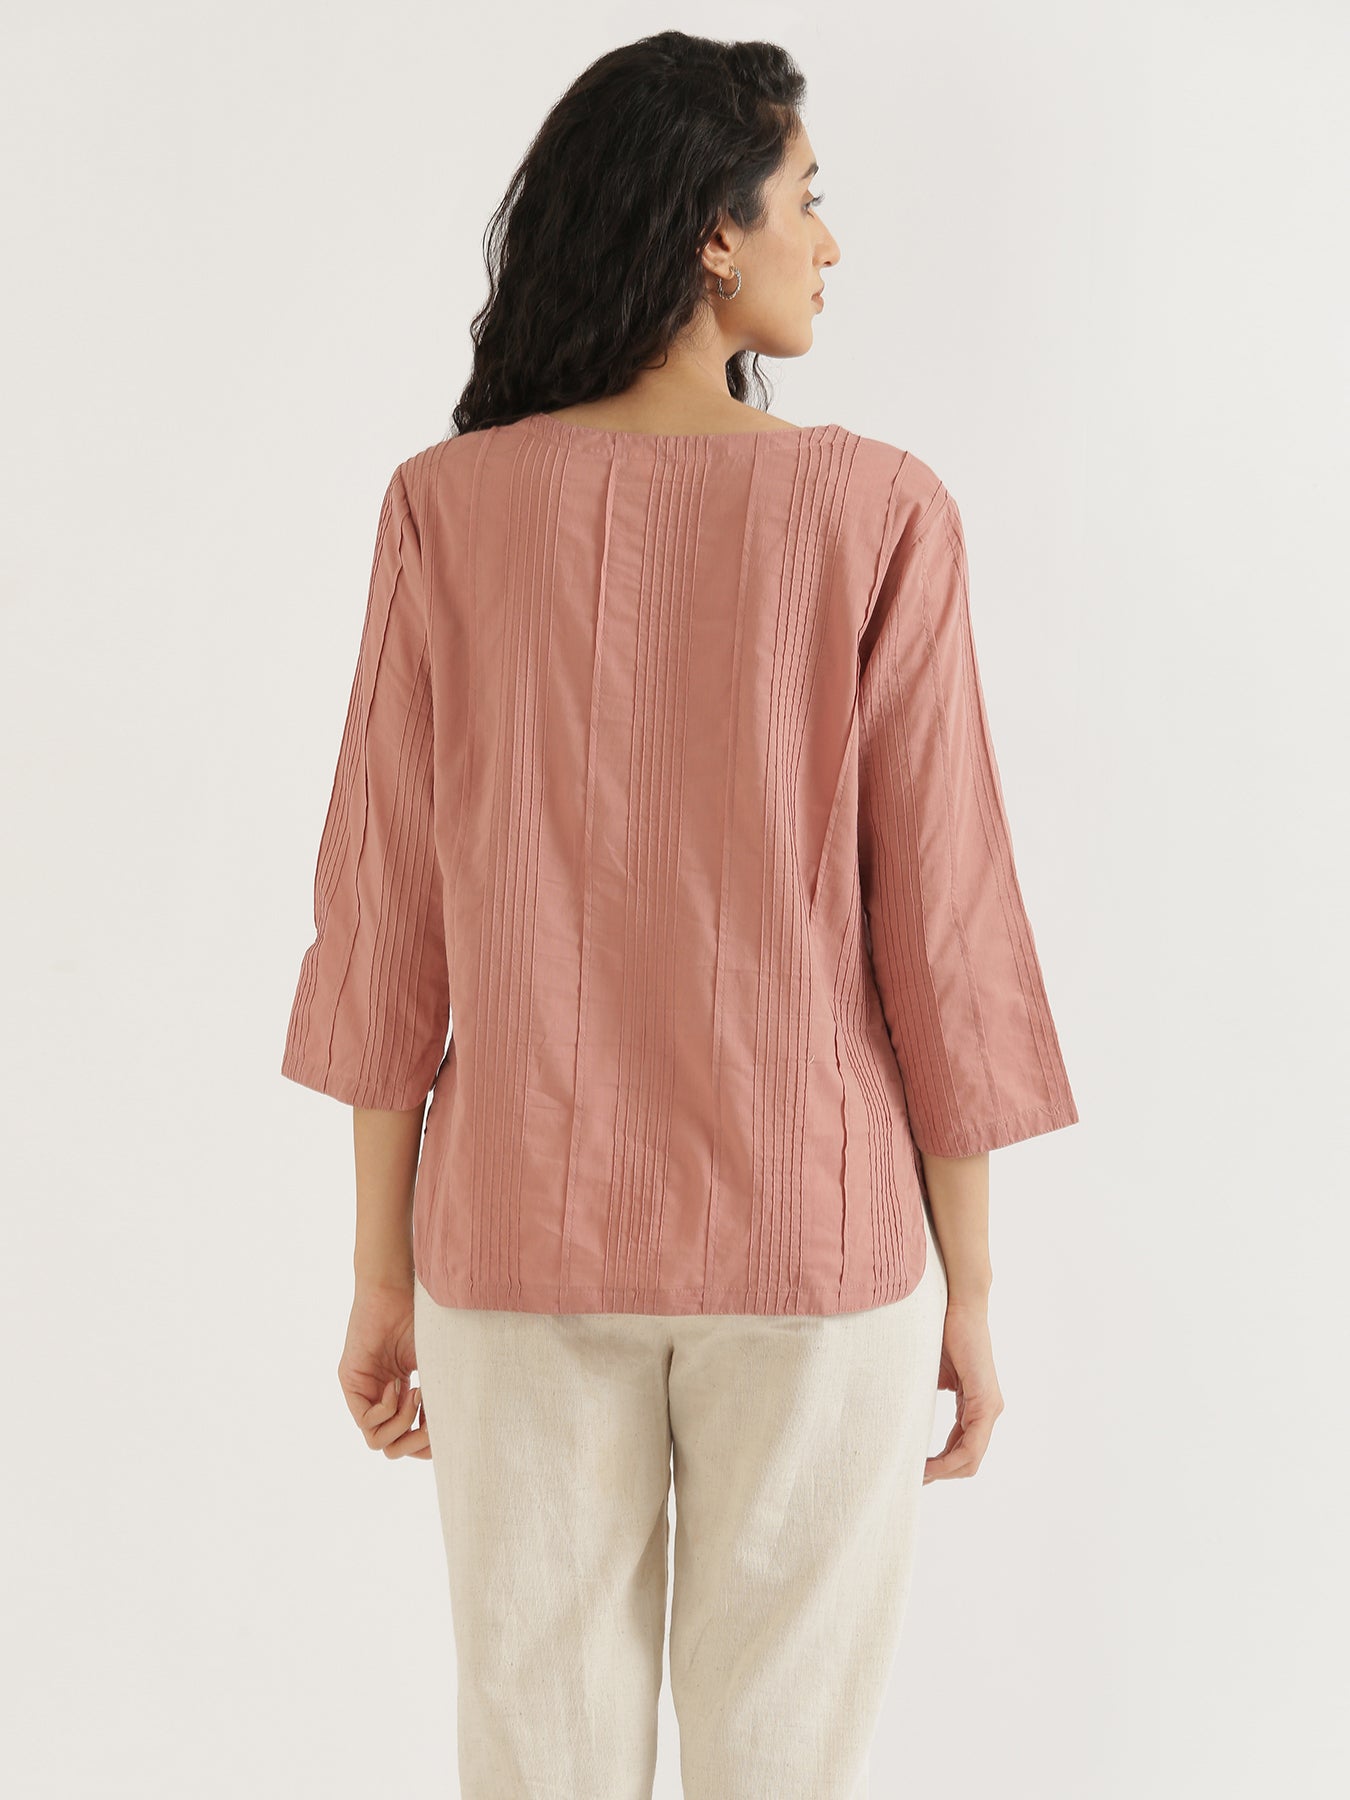 Rose Taupe Everyday Cotton Top